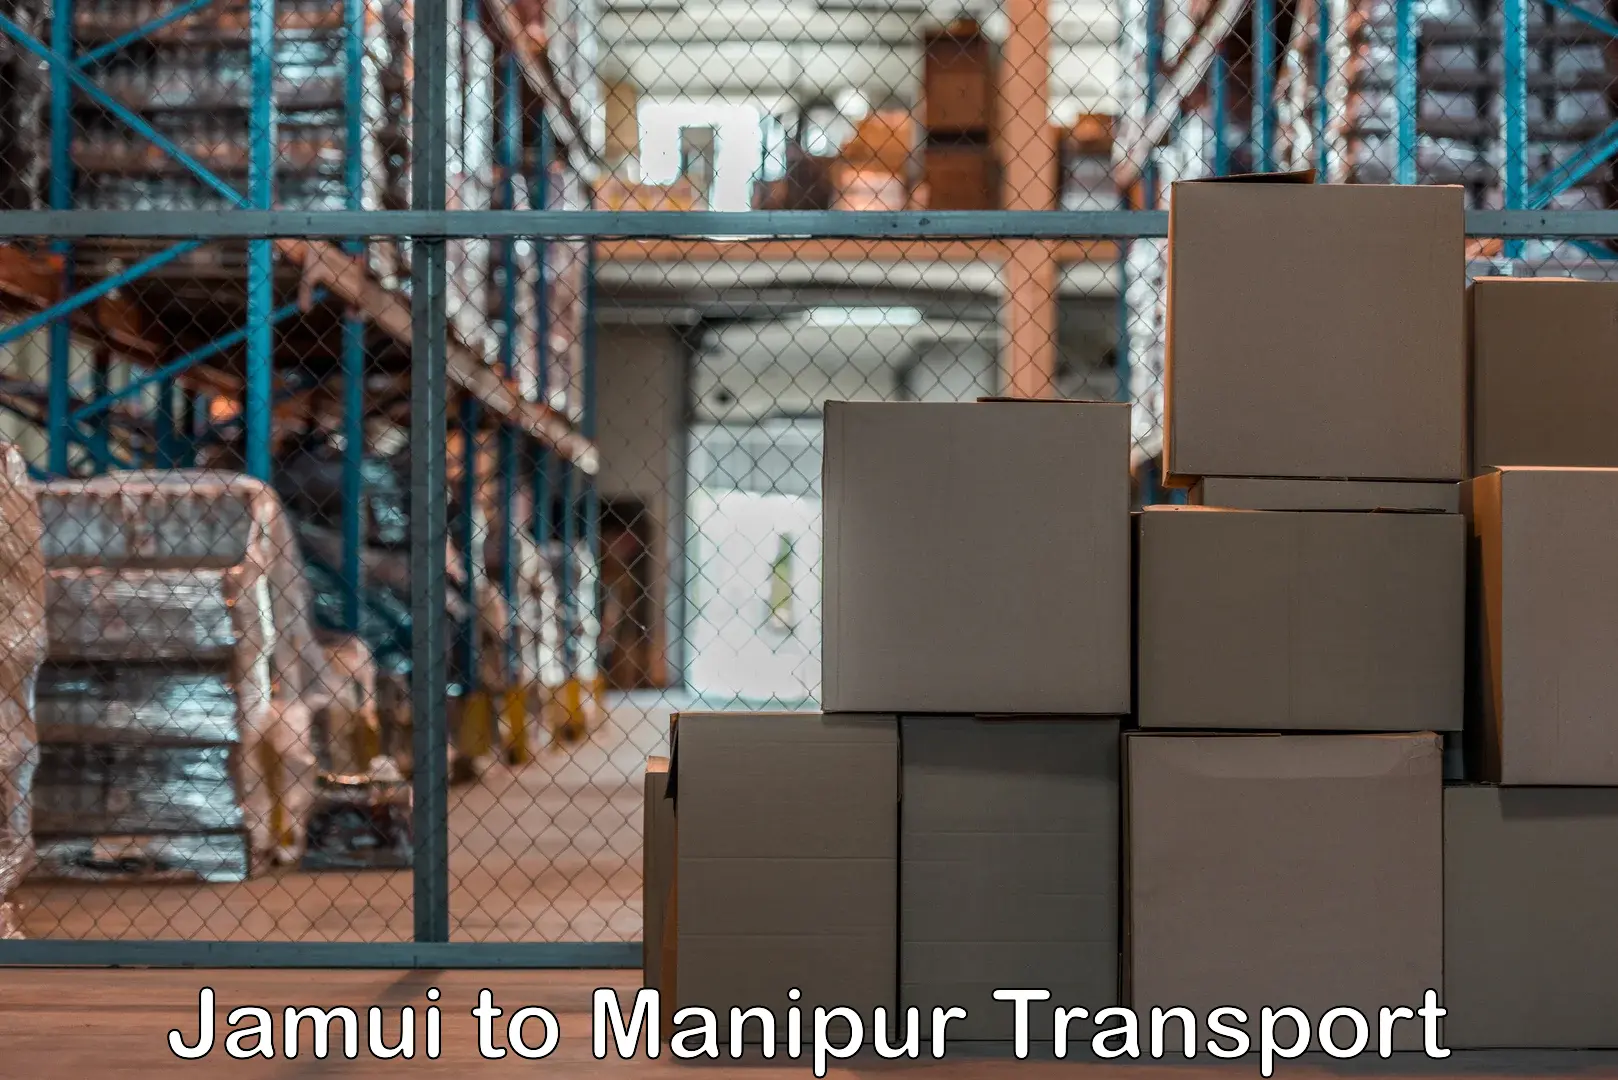 Daily parcel service transport Jamui to Manipur